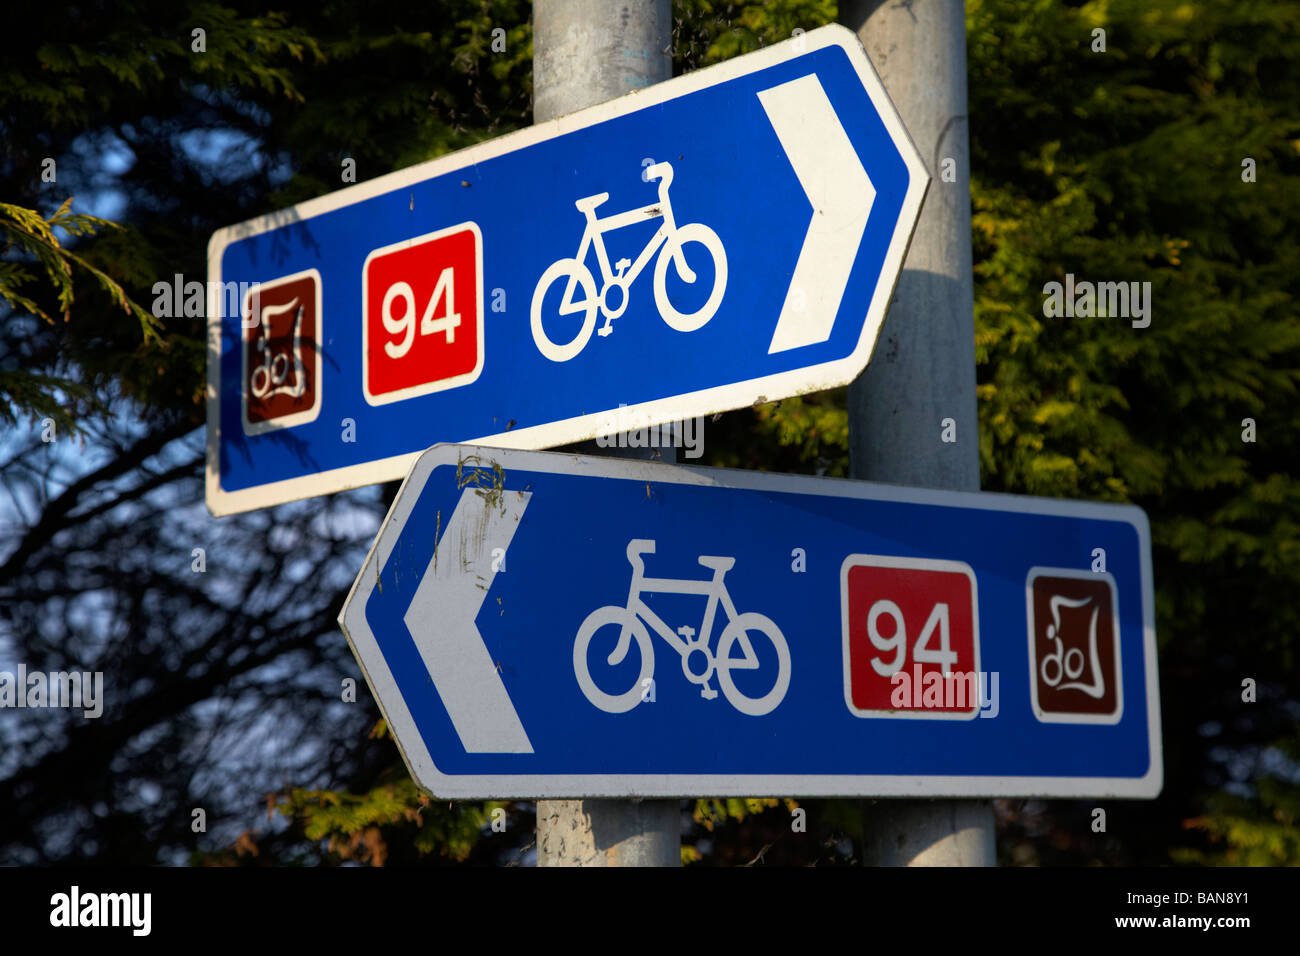 Signposts in county tyrone for sustans national cycle route 94 which circuits lough neagh in northern ireland Stock Photo